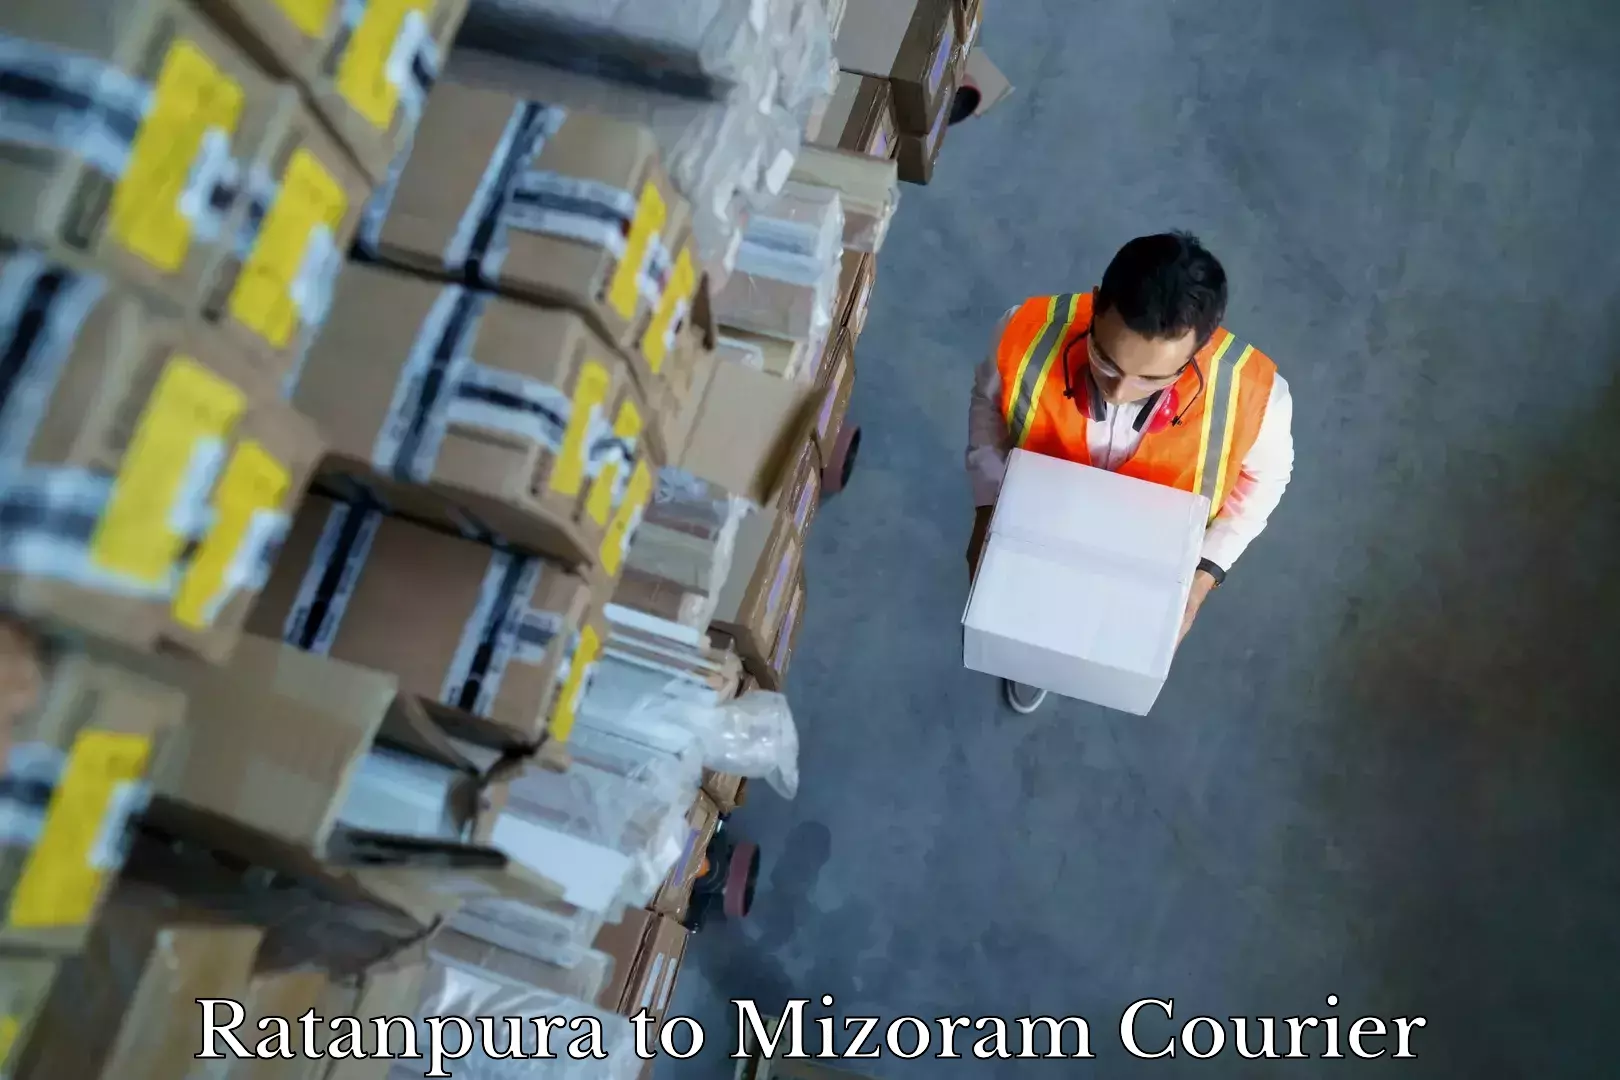 Smooth relocation services in Ratanpura to Mizoram